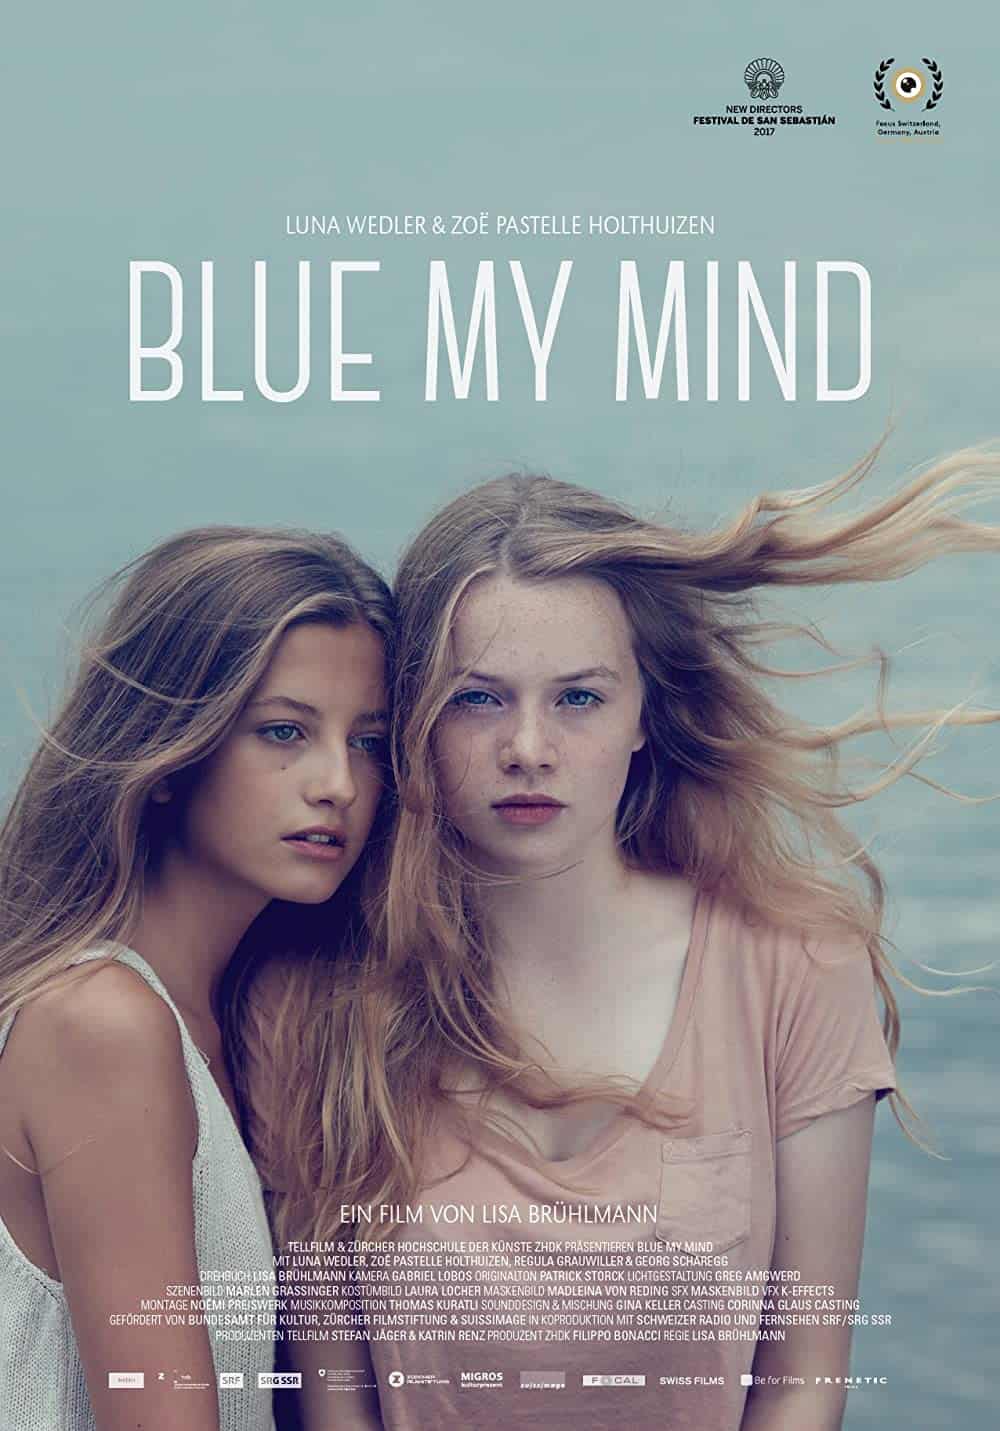 Blue my mind (2017) Best Mermaid Films To Check Out